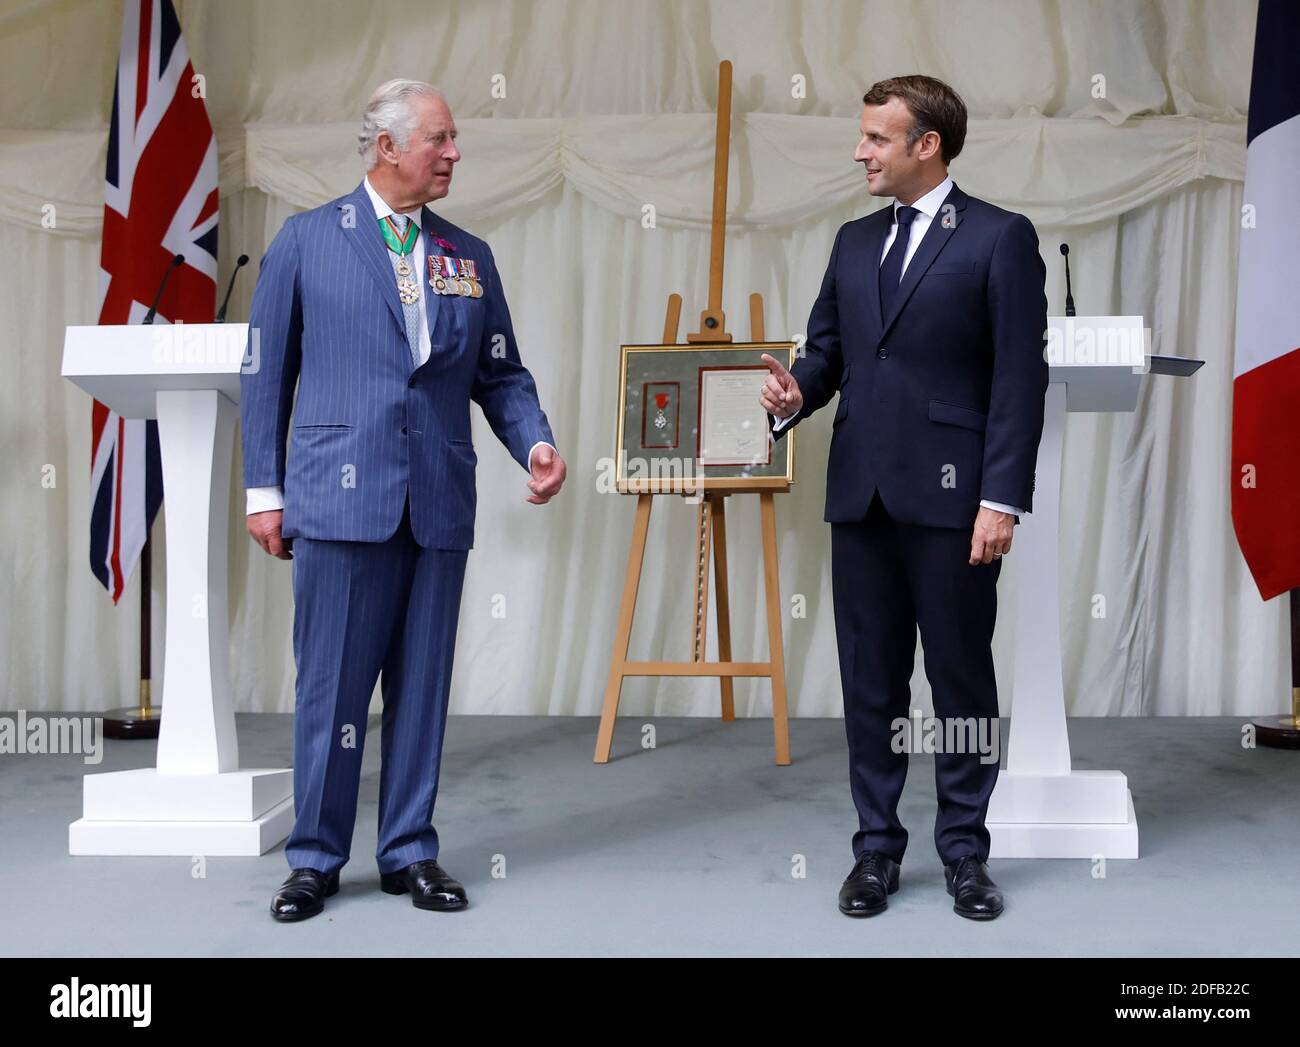 Britain's Prince Charles, Prince of Wales (L) and French President Emmanuel Macron (R) speaks after a ceremony to present the Legion d'Honneur – France's highest distinction – to London for services during WW2 at Carlton Gardens in central London on June 18, 2020 during a visit to mark the anniversary of former de Gaulle's appeal to French people to resist the Nazi occupation. - Macron visited London on June 18 to commemorate the 80th anniversary of former French president Charles de Gaulle's appeal to French people to resist the Nazi occupation during World War II. Photo by Tolga AKMEN/Pool/A Stock Photo